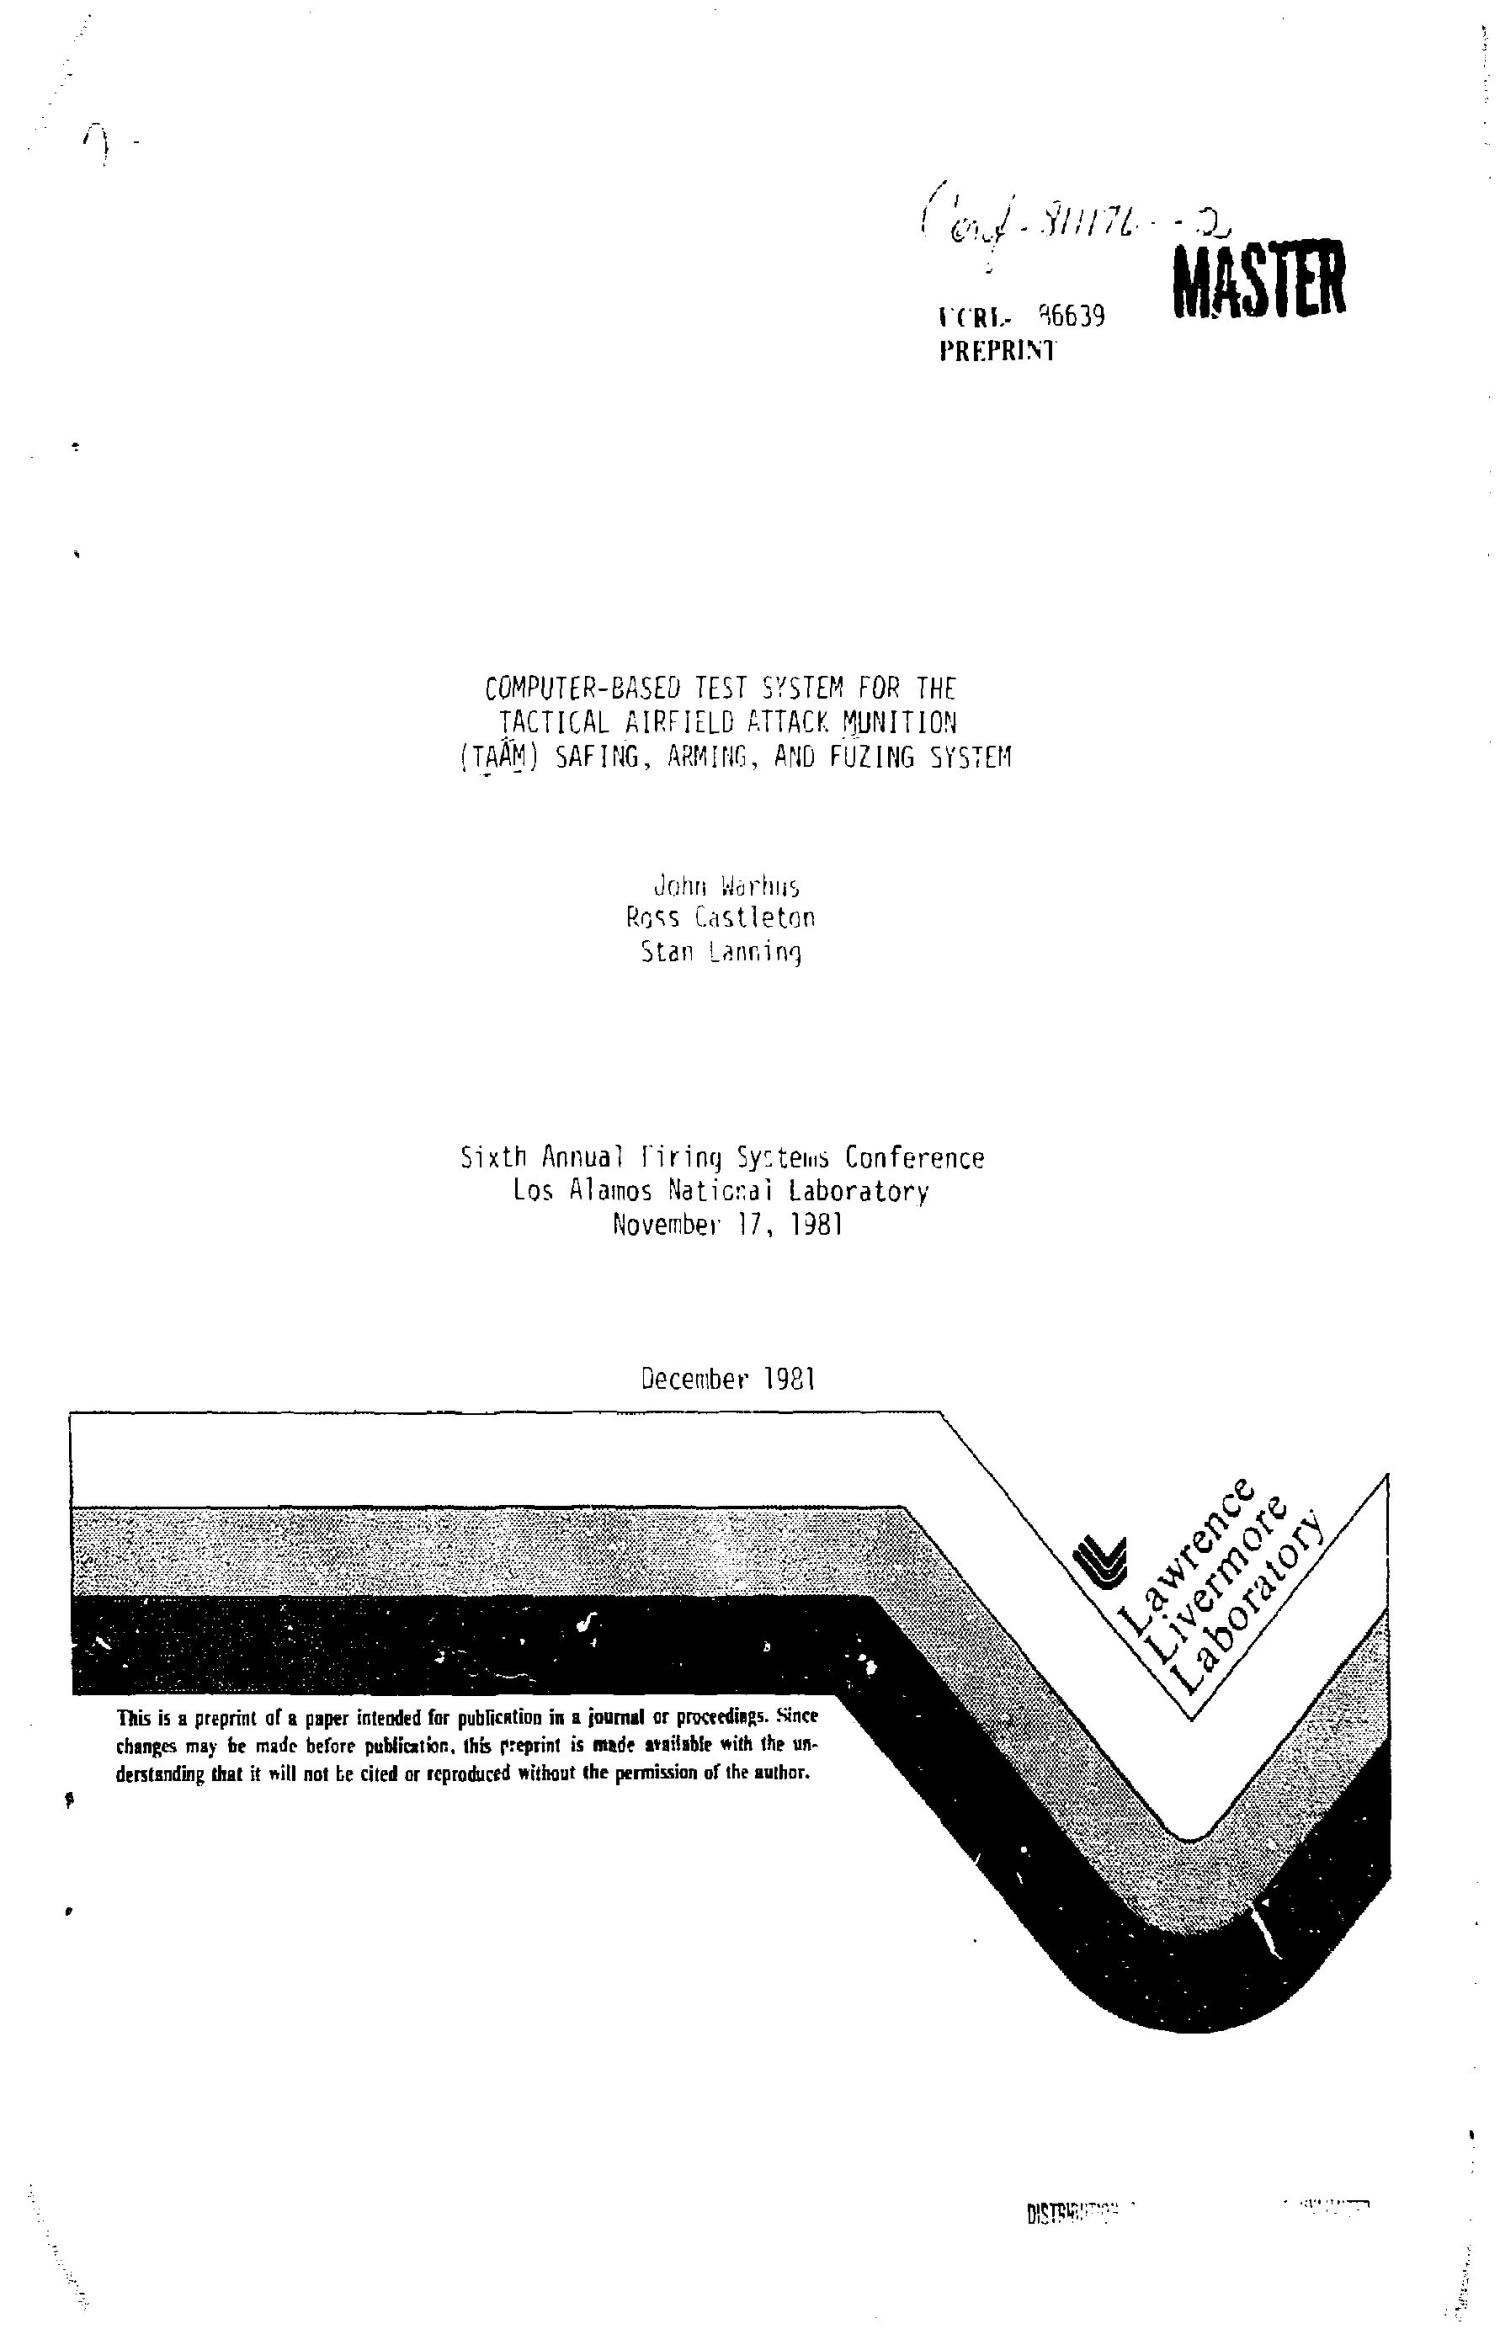 Computer-based test system for the Tactical Airfield Attack Munition (TAAM) safing, arming, and fuzing system
                                                
                                                    [Sequence #]: 1 of 33
                                                